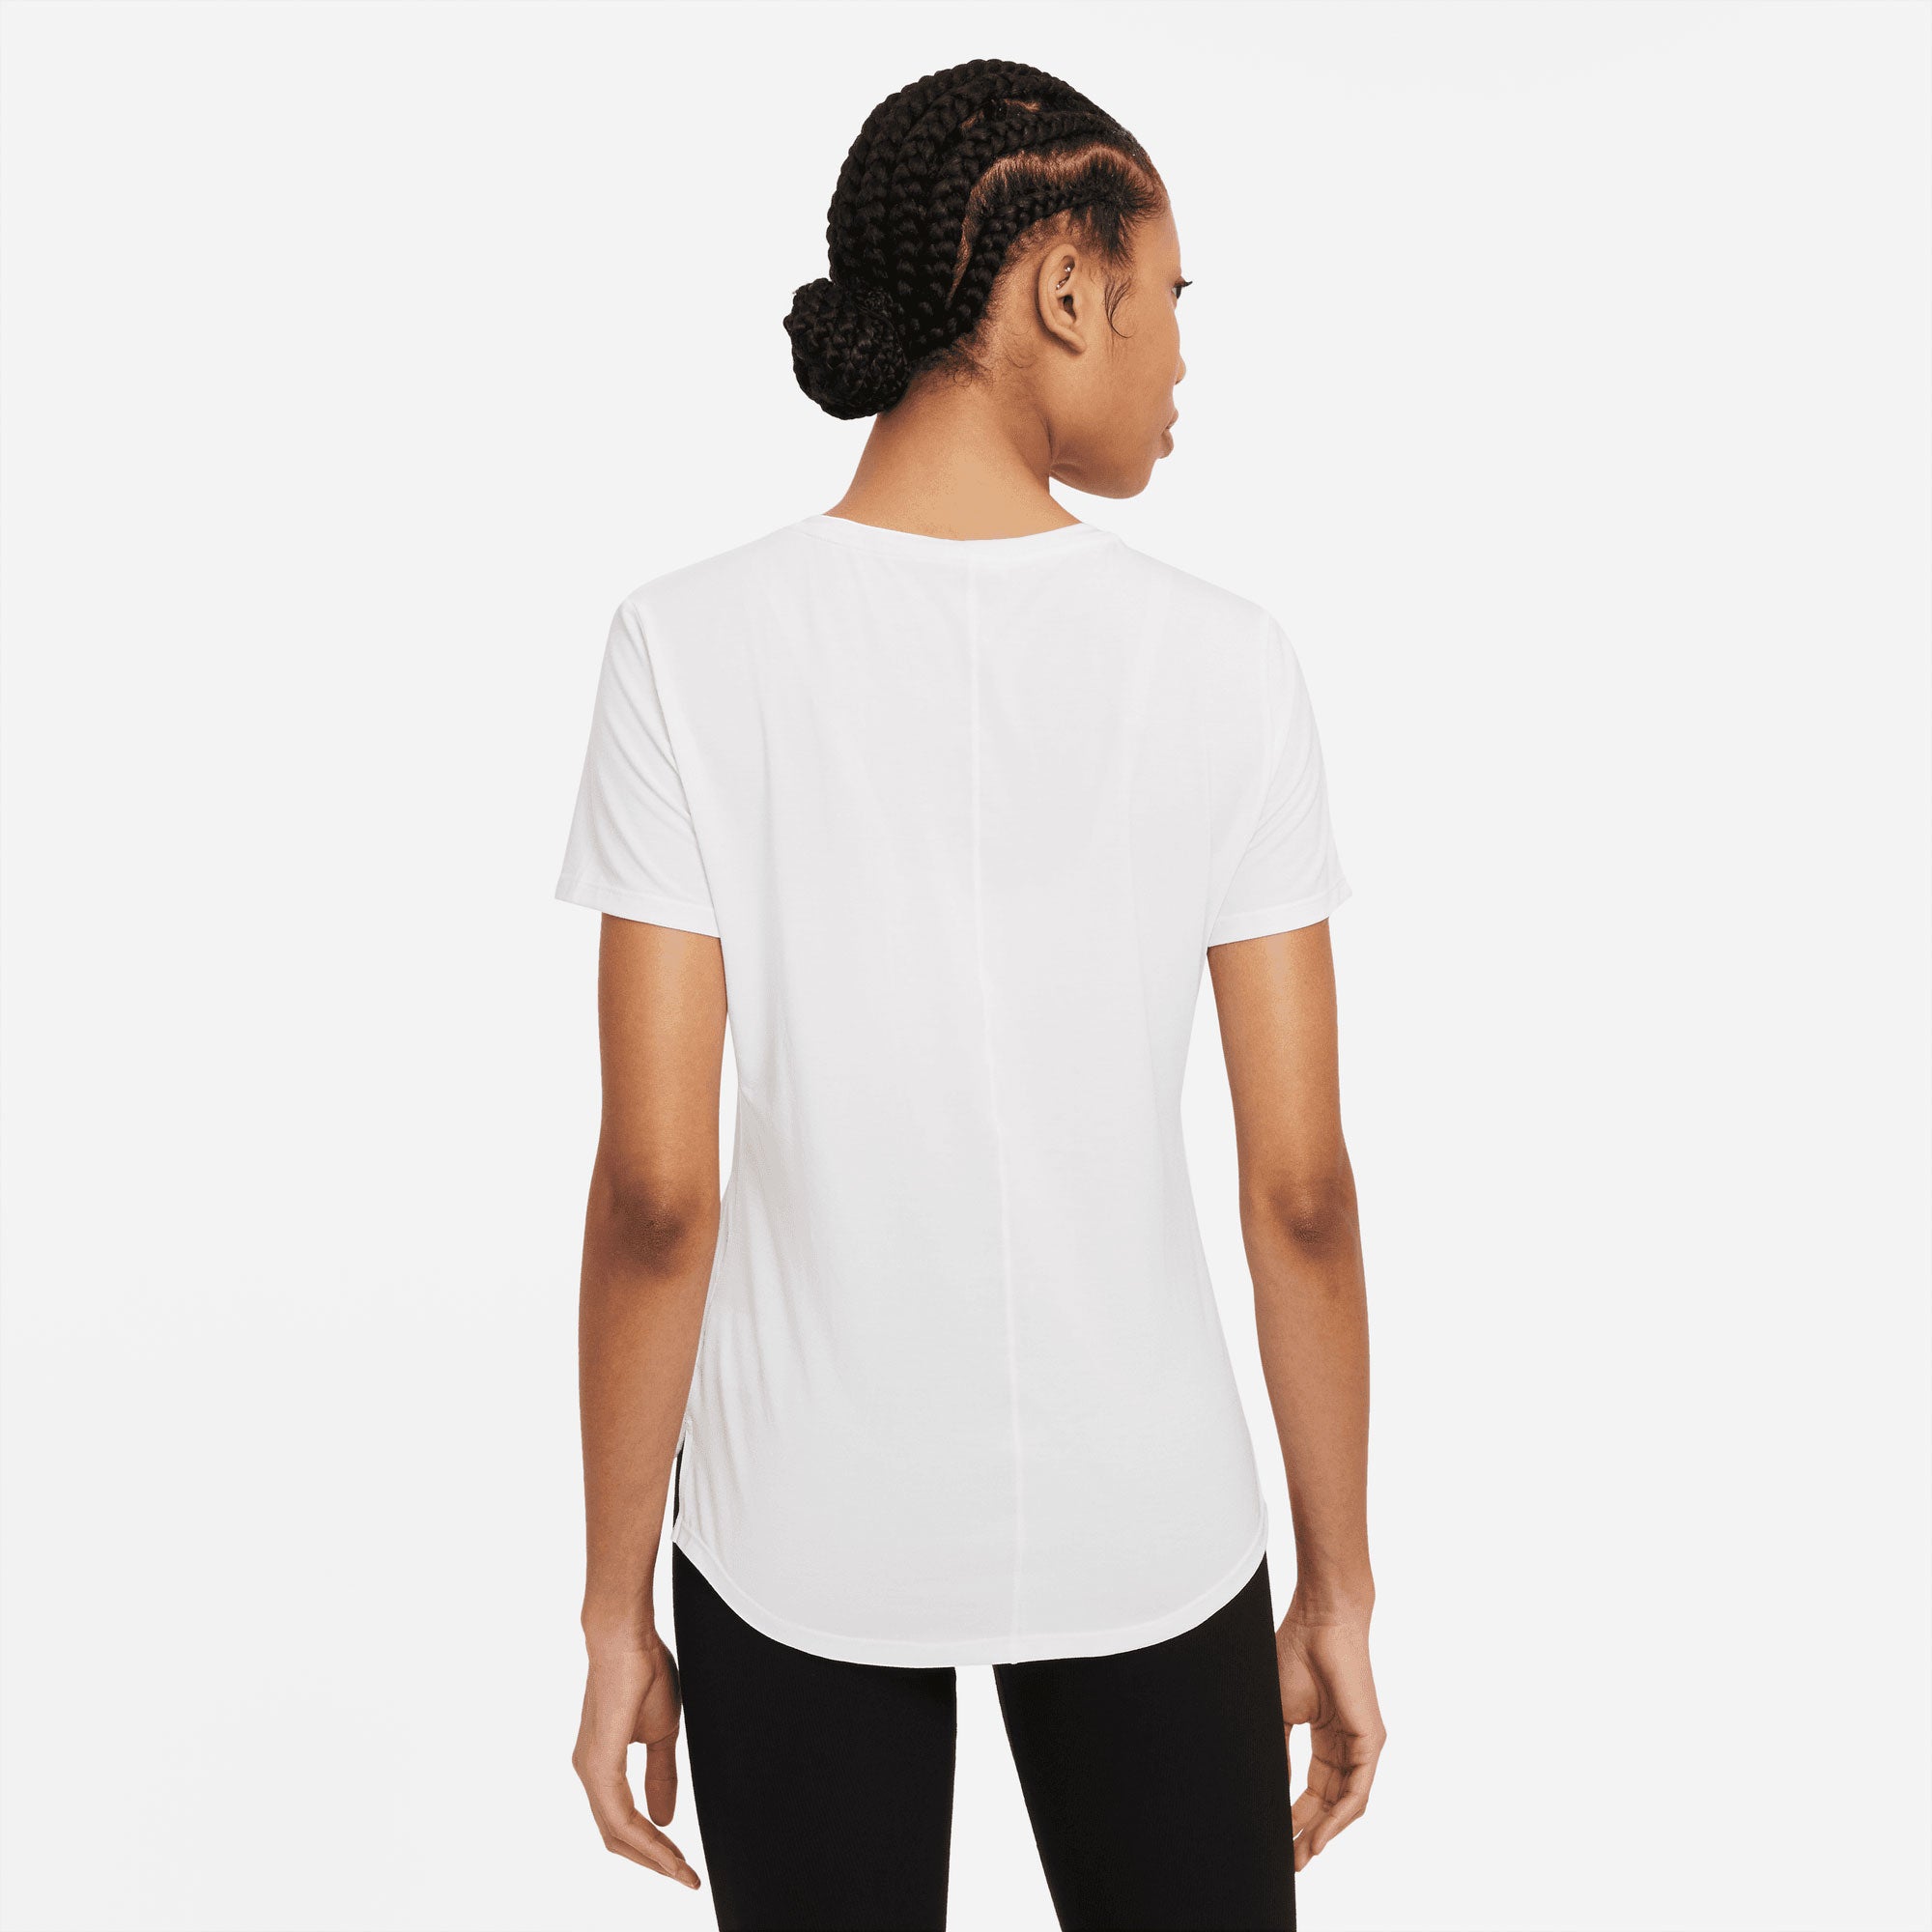 Nike One Luxe Dri-FIT Women's Standard Fit Shirt White (2)